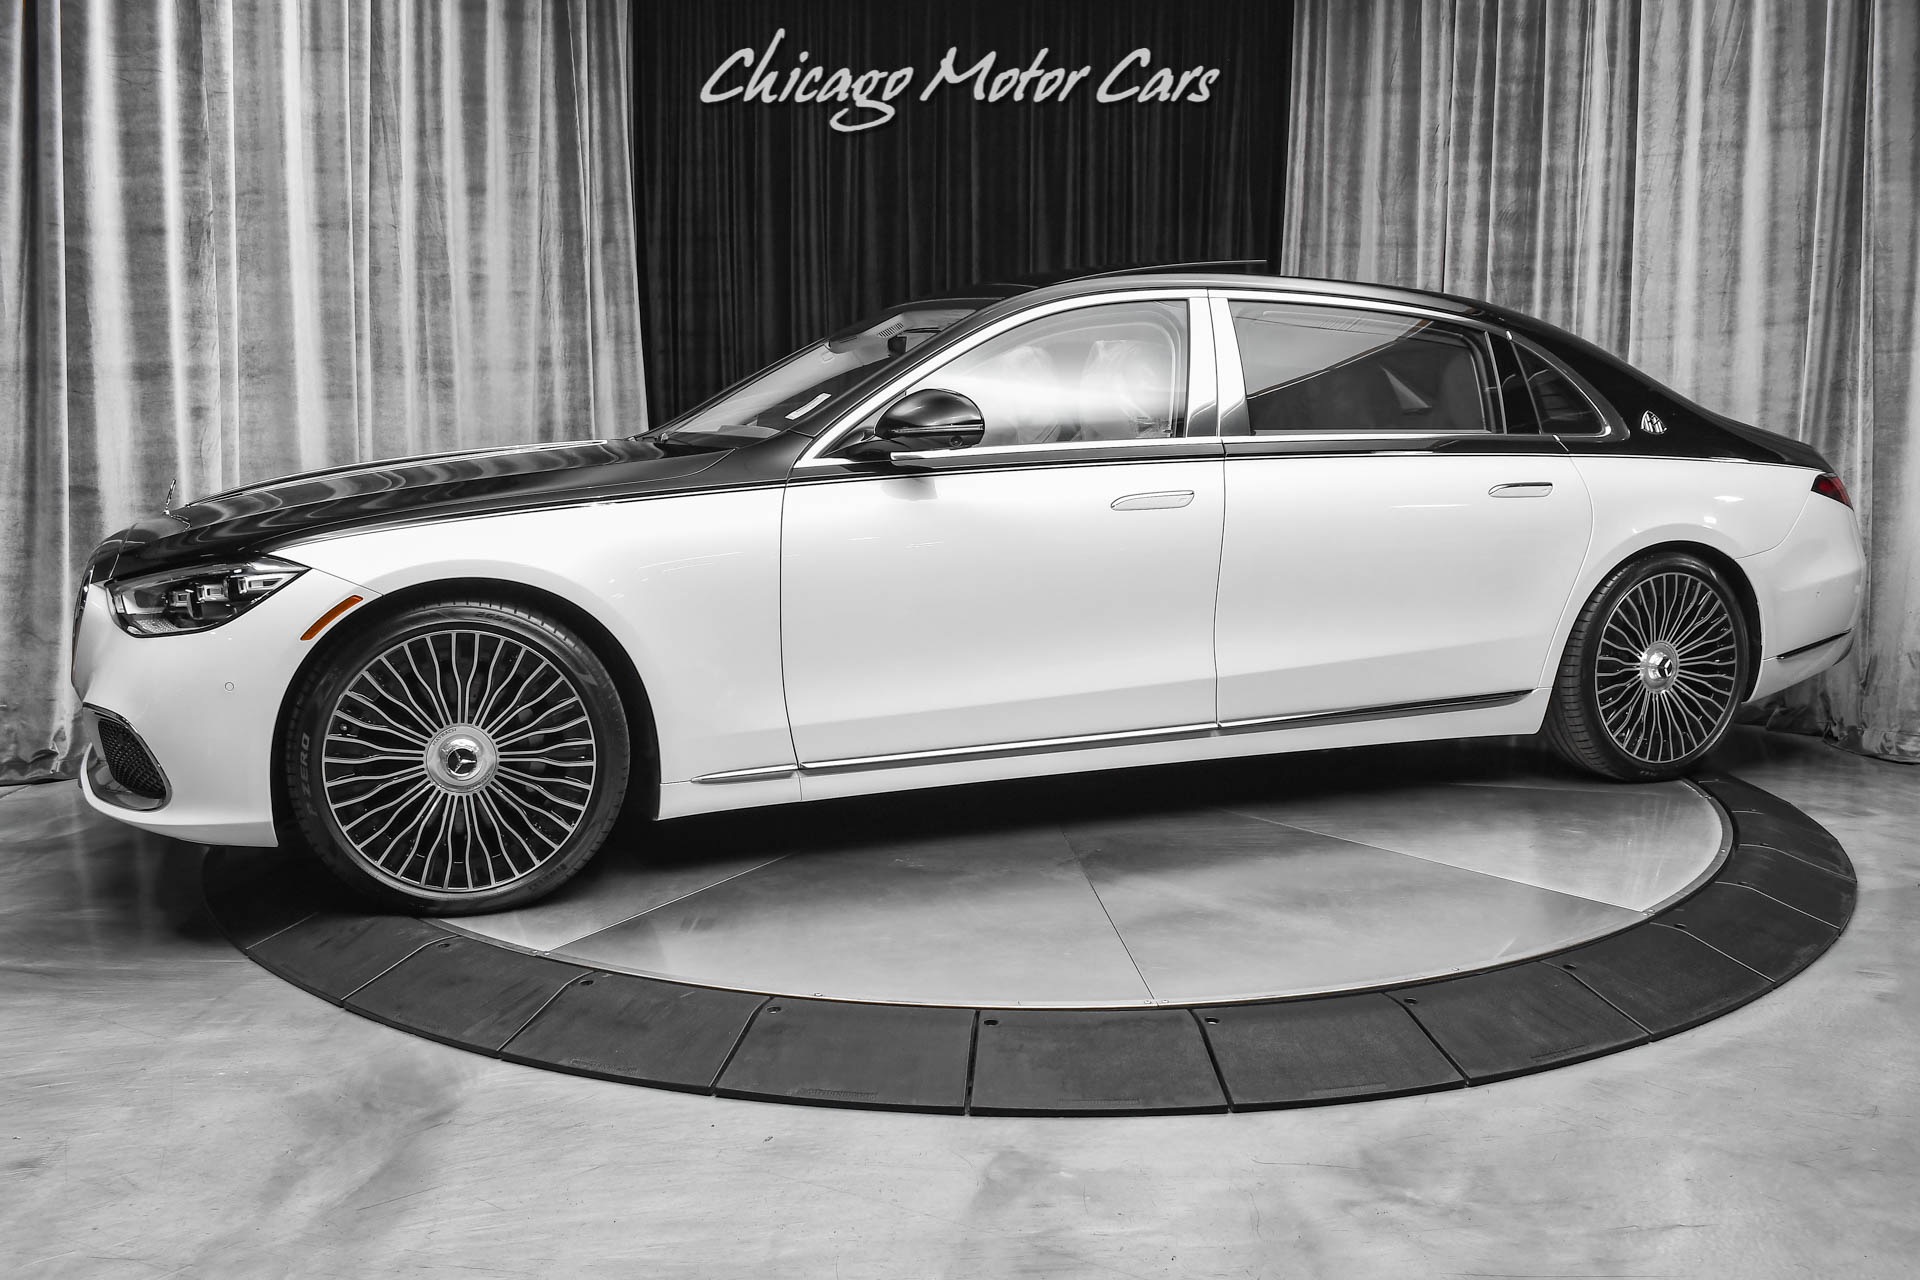 Used 2022 Mercedes-Benz S580 Maybach 4Matic RARE 2 Tone! Special Order  White Interior! Every Option Possible! BEST Spec For Sale (Special Pricing)  | Chicago Motor Cars Stock #19172